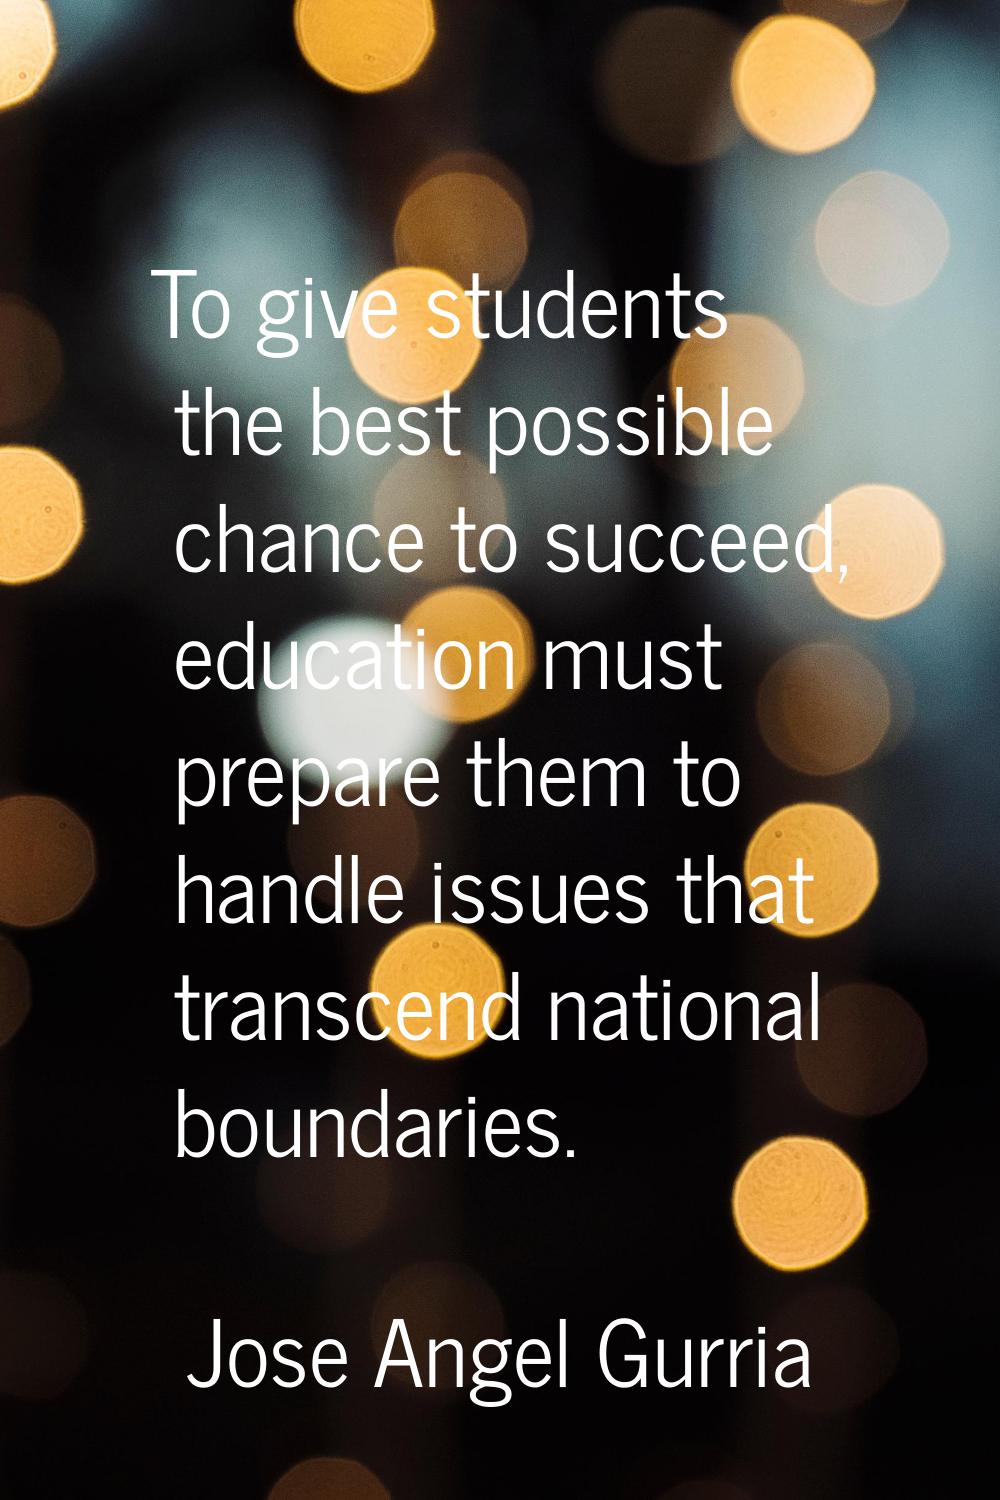 To give students the best possible chance to succeed, education must prepare them to handle issues 